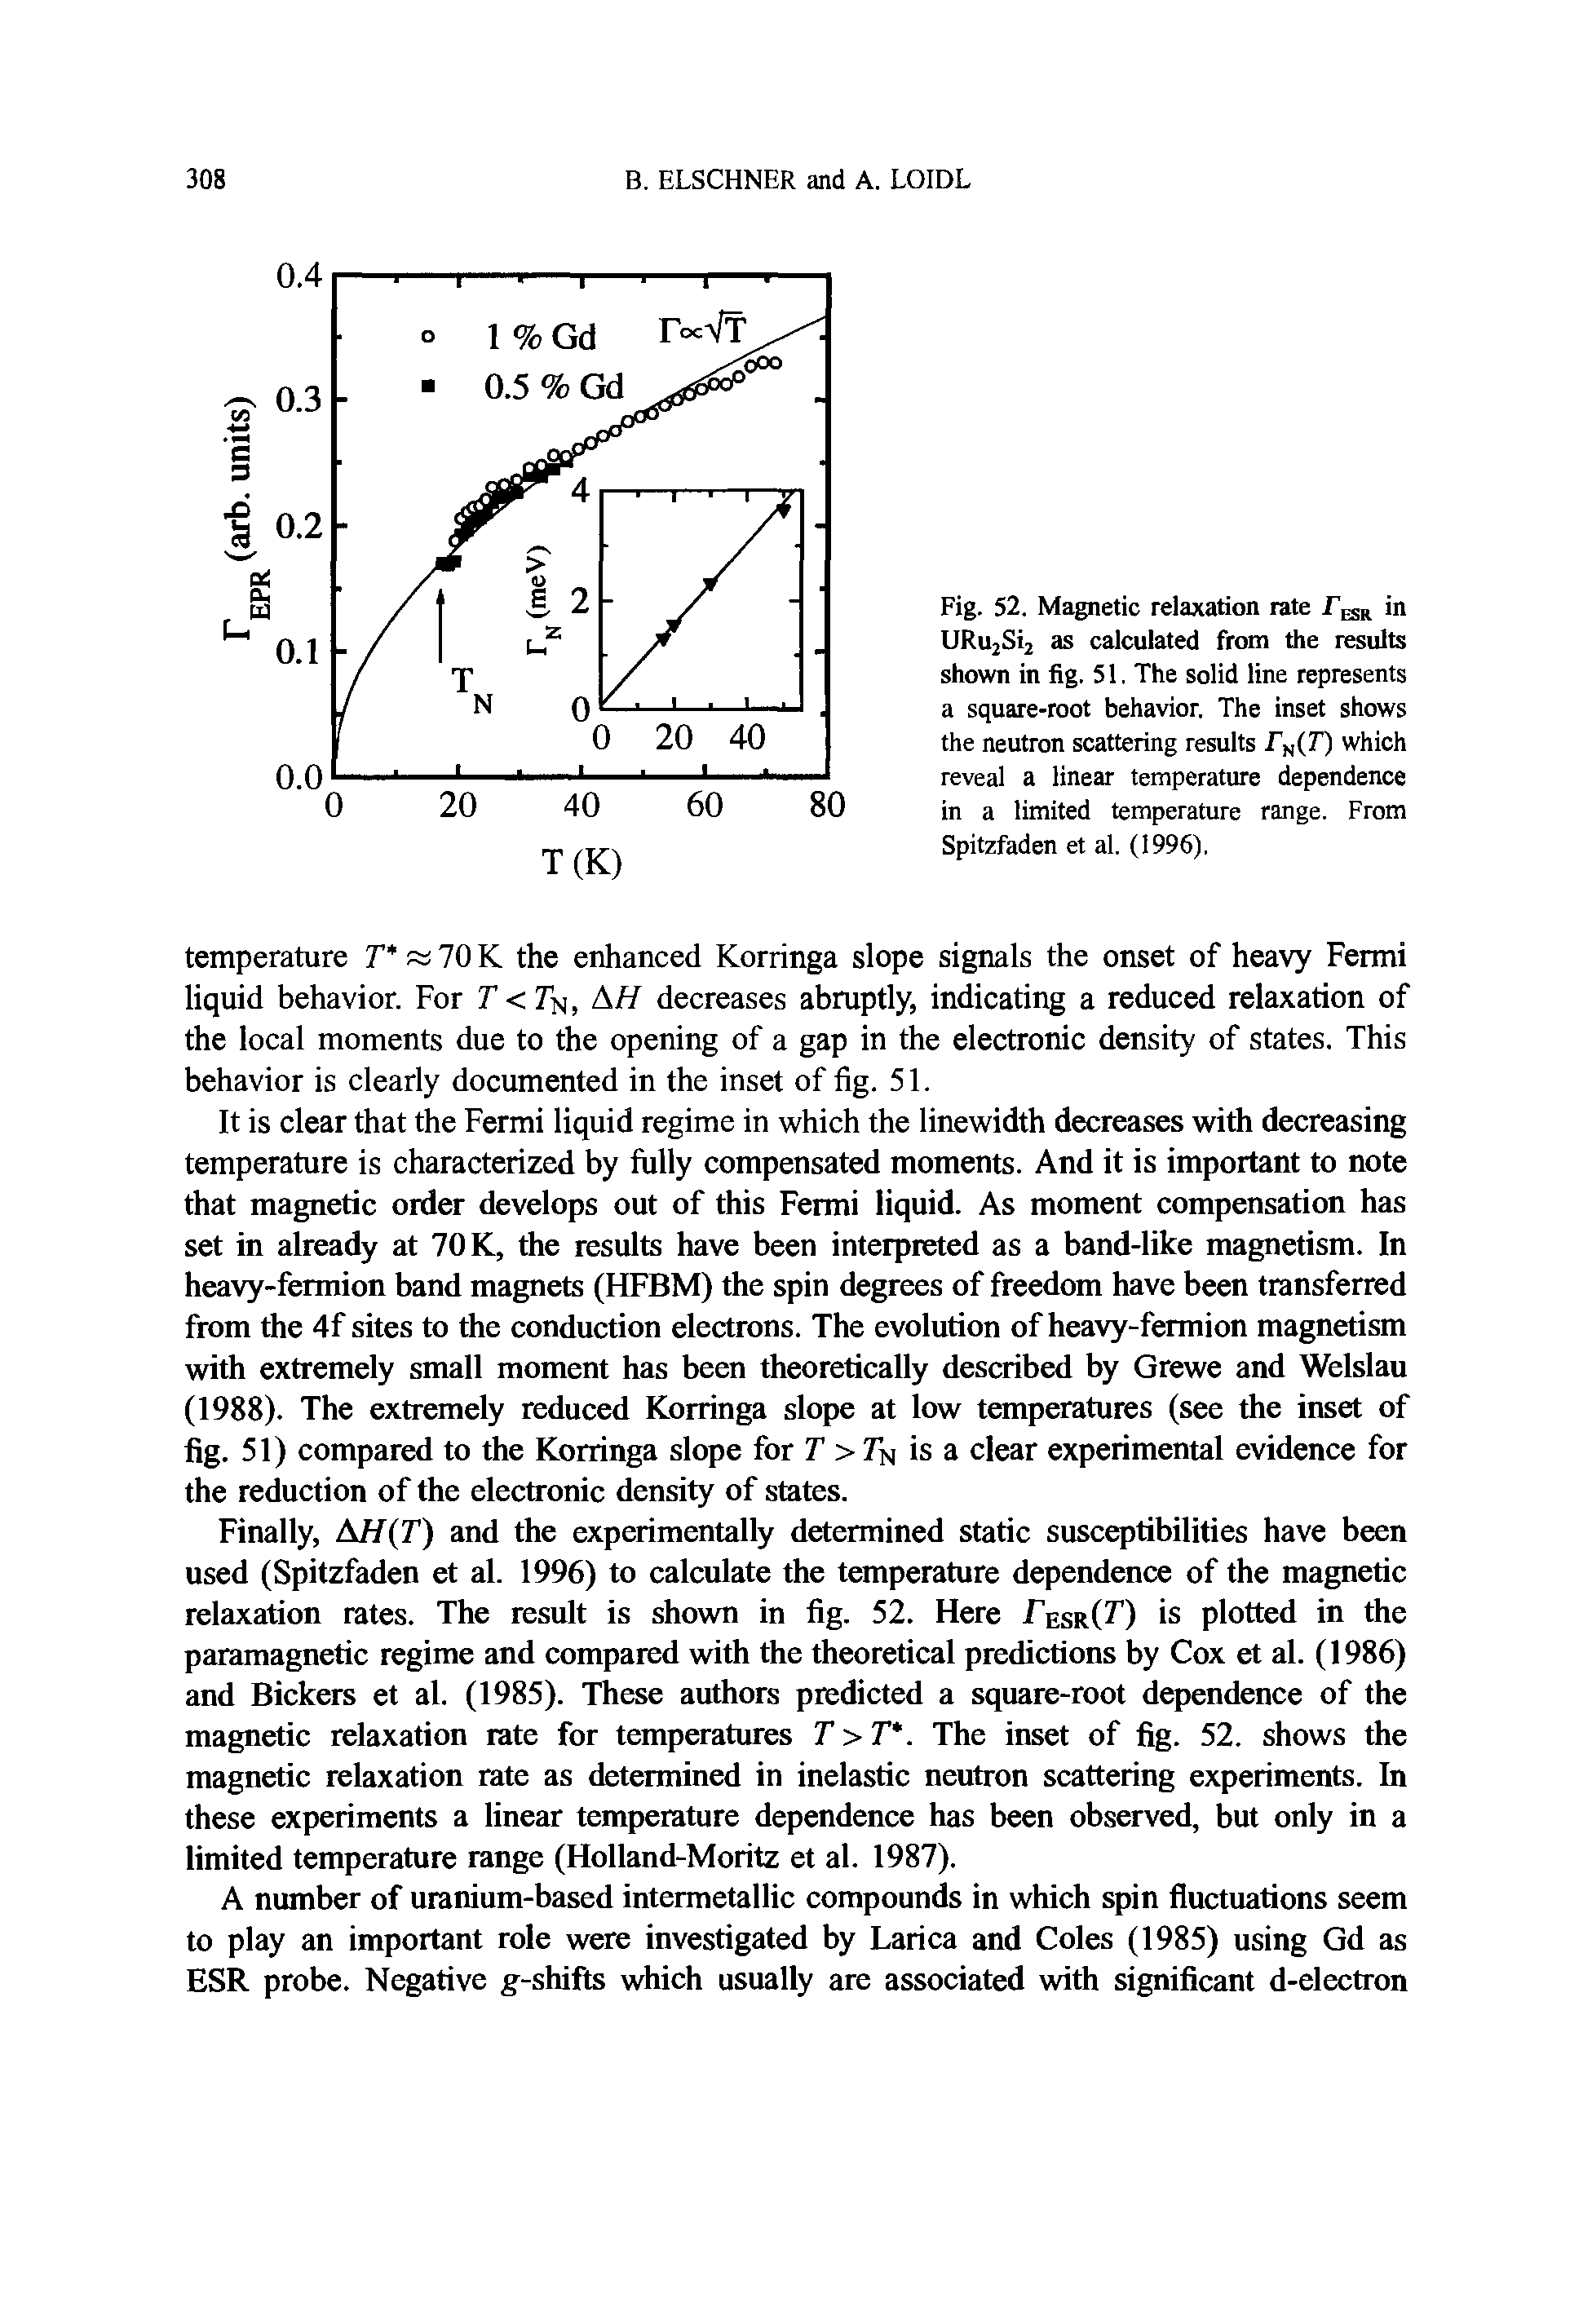 Fig. 52. Magnetic relaxation rate r in URu2Si2 as calculated from the results shown in fig. 51. The solid line represents a square-root behavior. The inset shows the neutron scattering results r, T) which reveal a linear temperature dependence in a limited temperature range. From Spitzfaden et al. (1996).